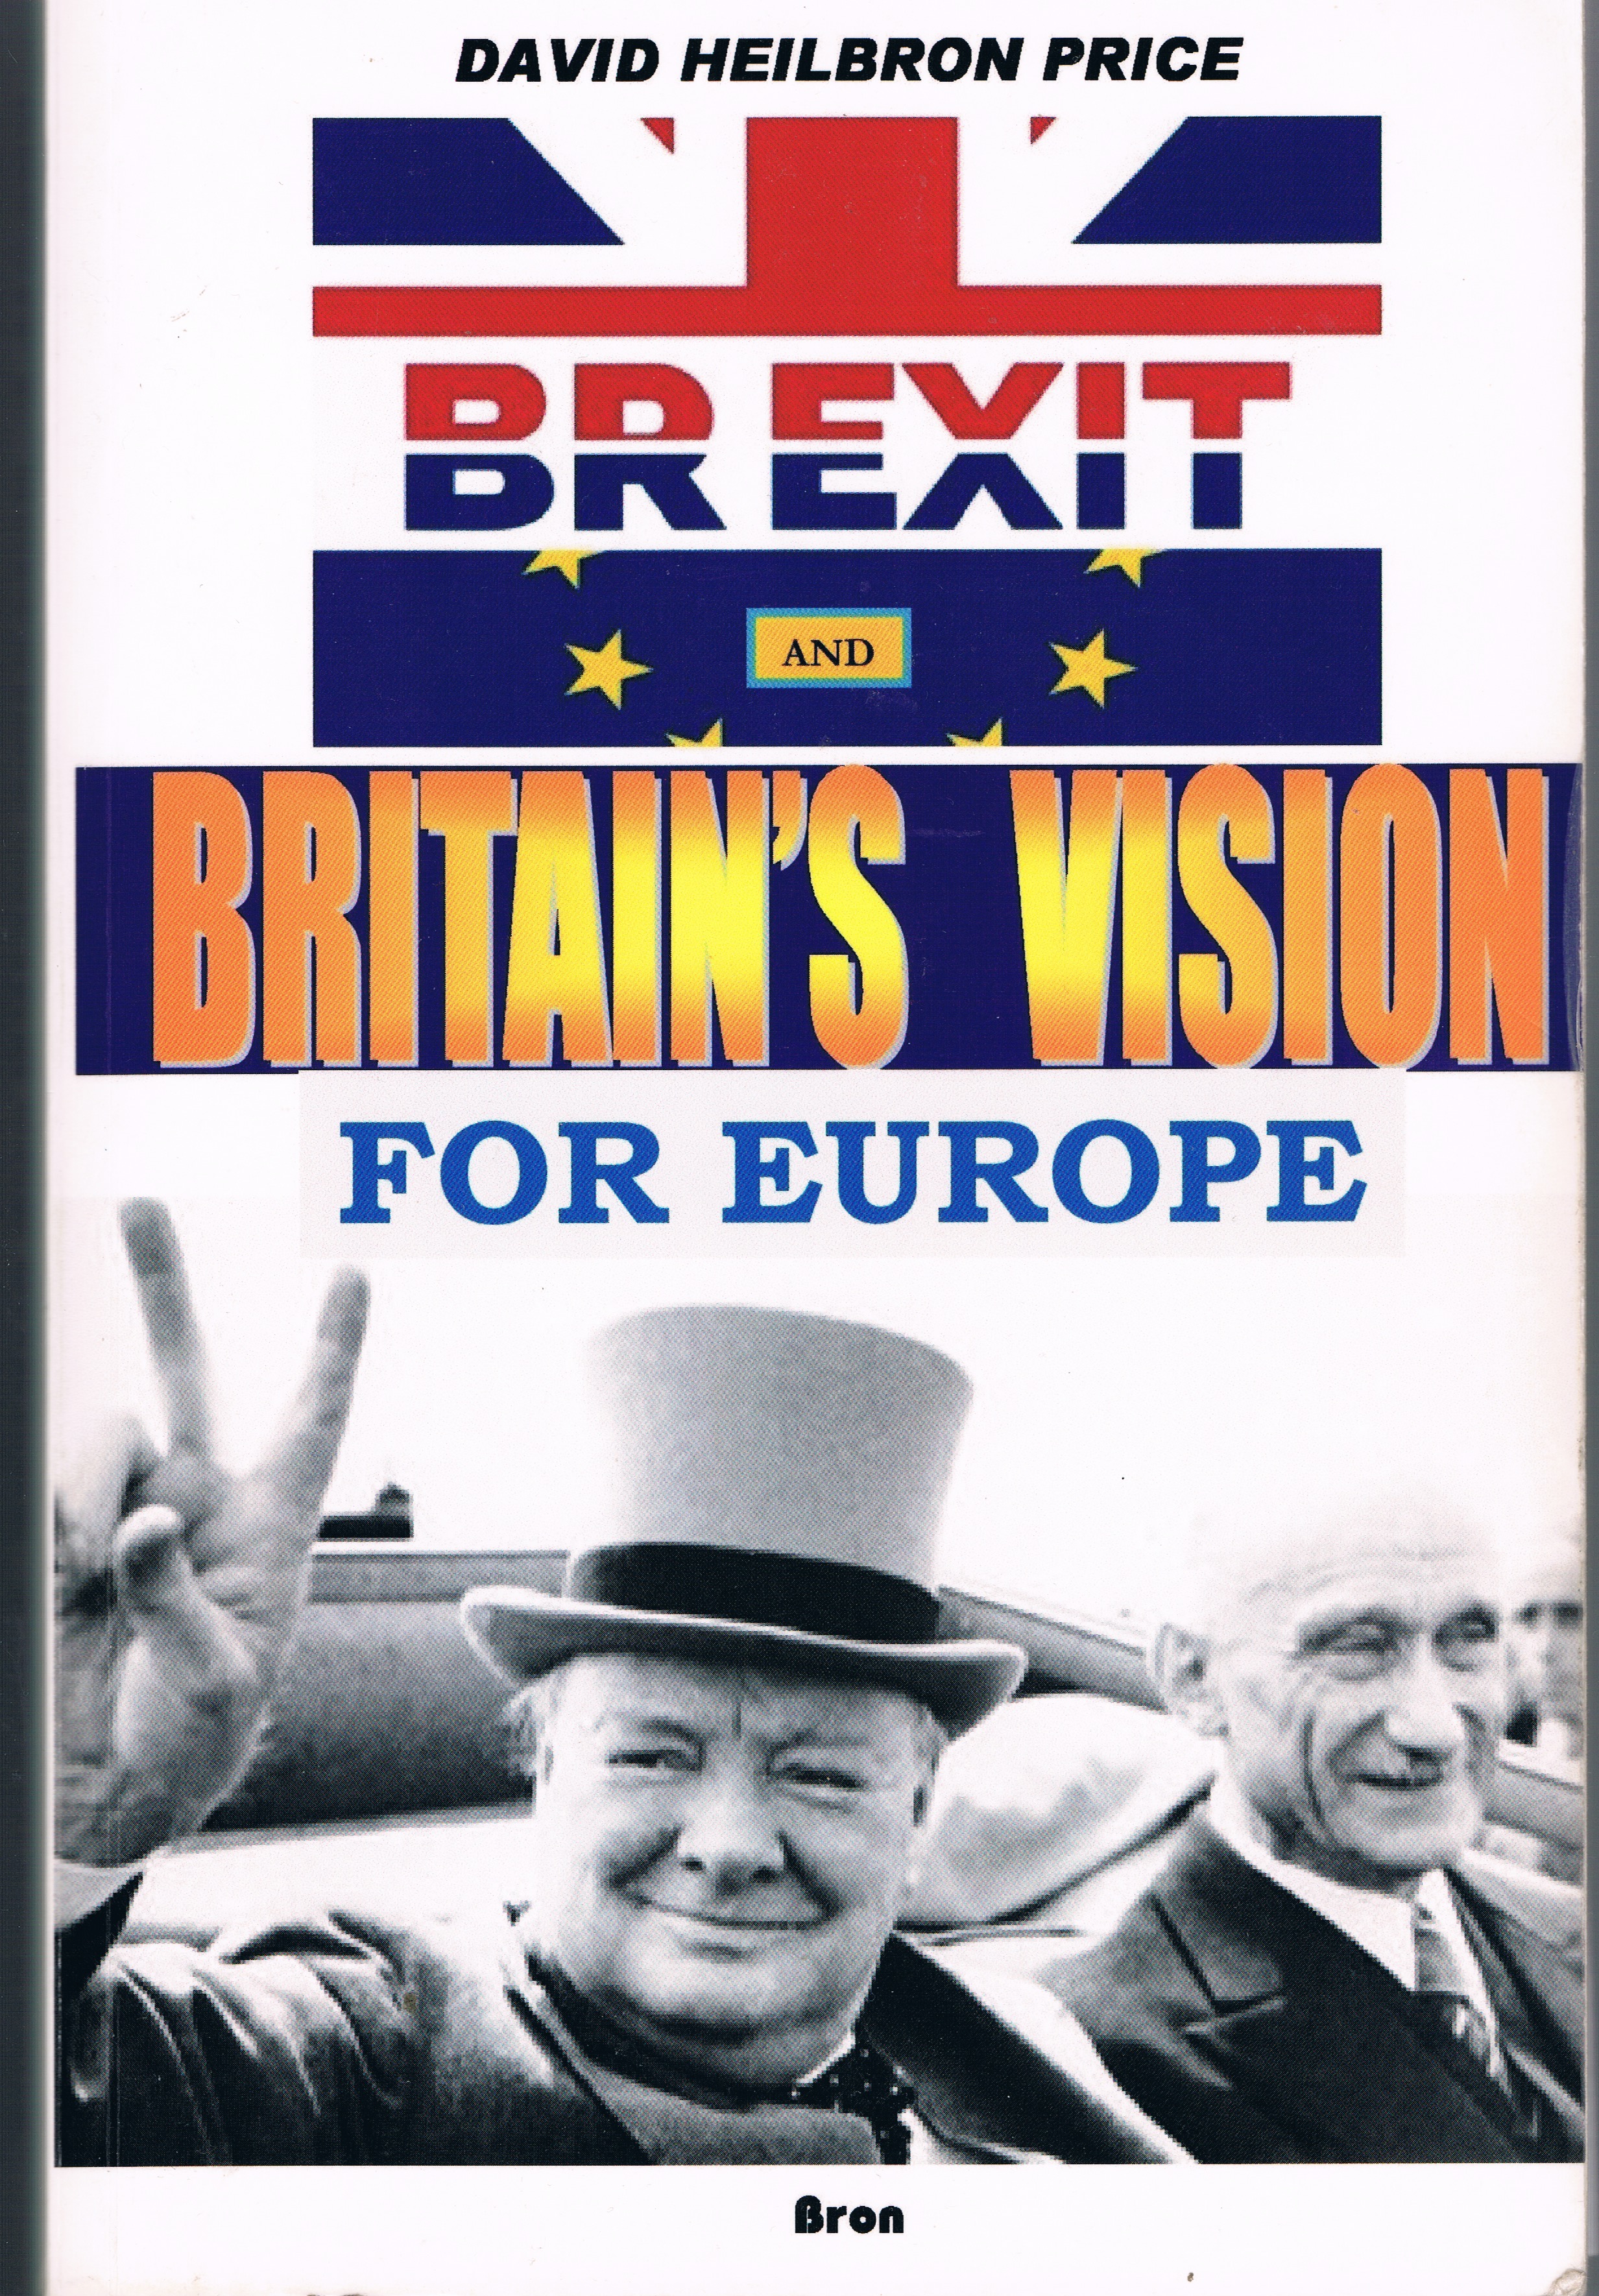 Book: Brexit and Britain's Vision for Europe